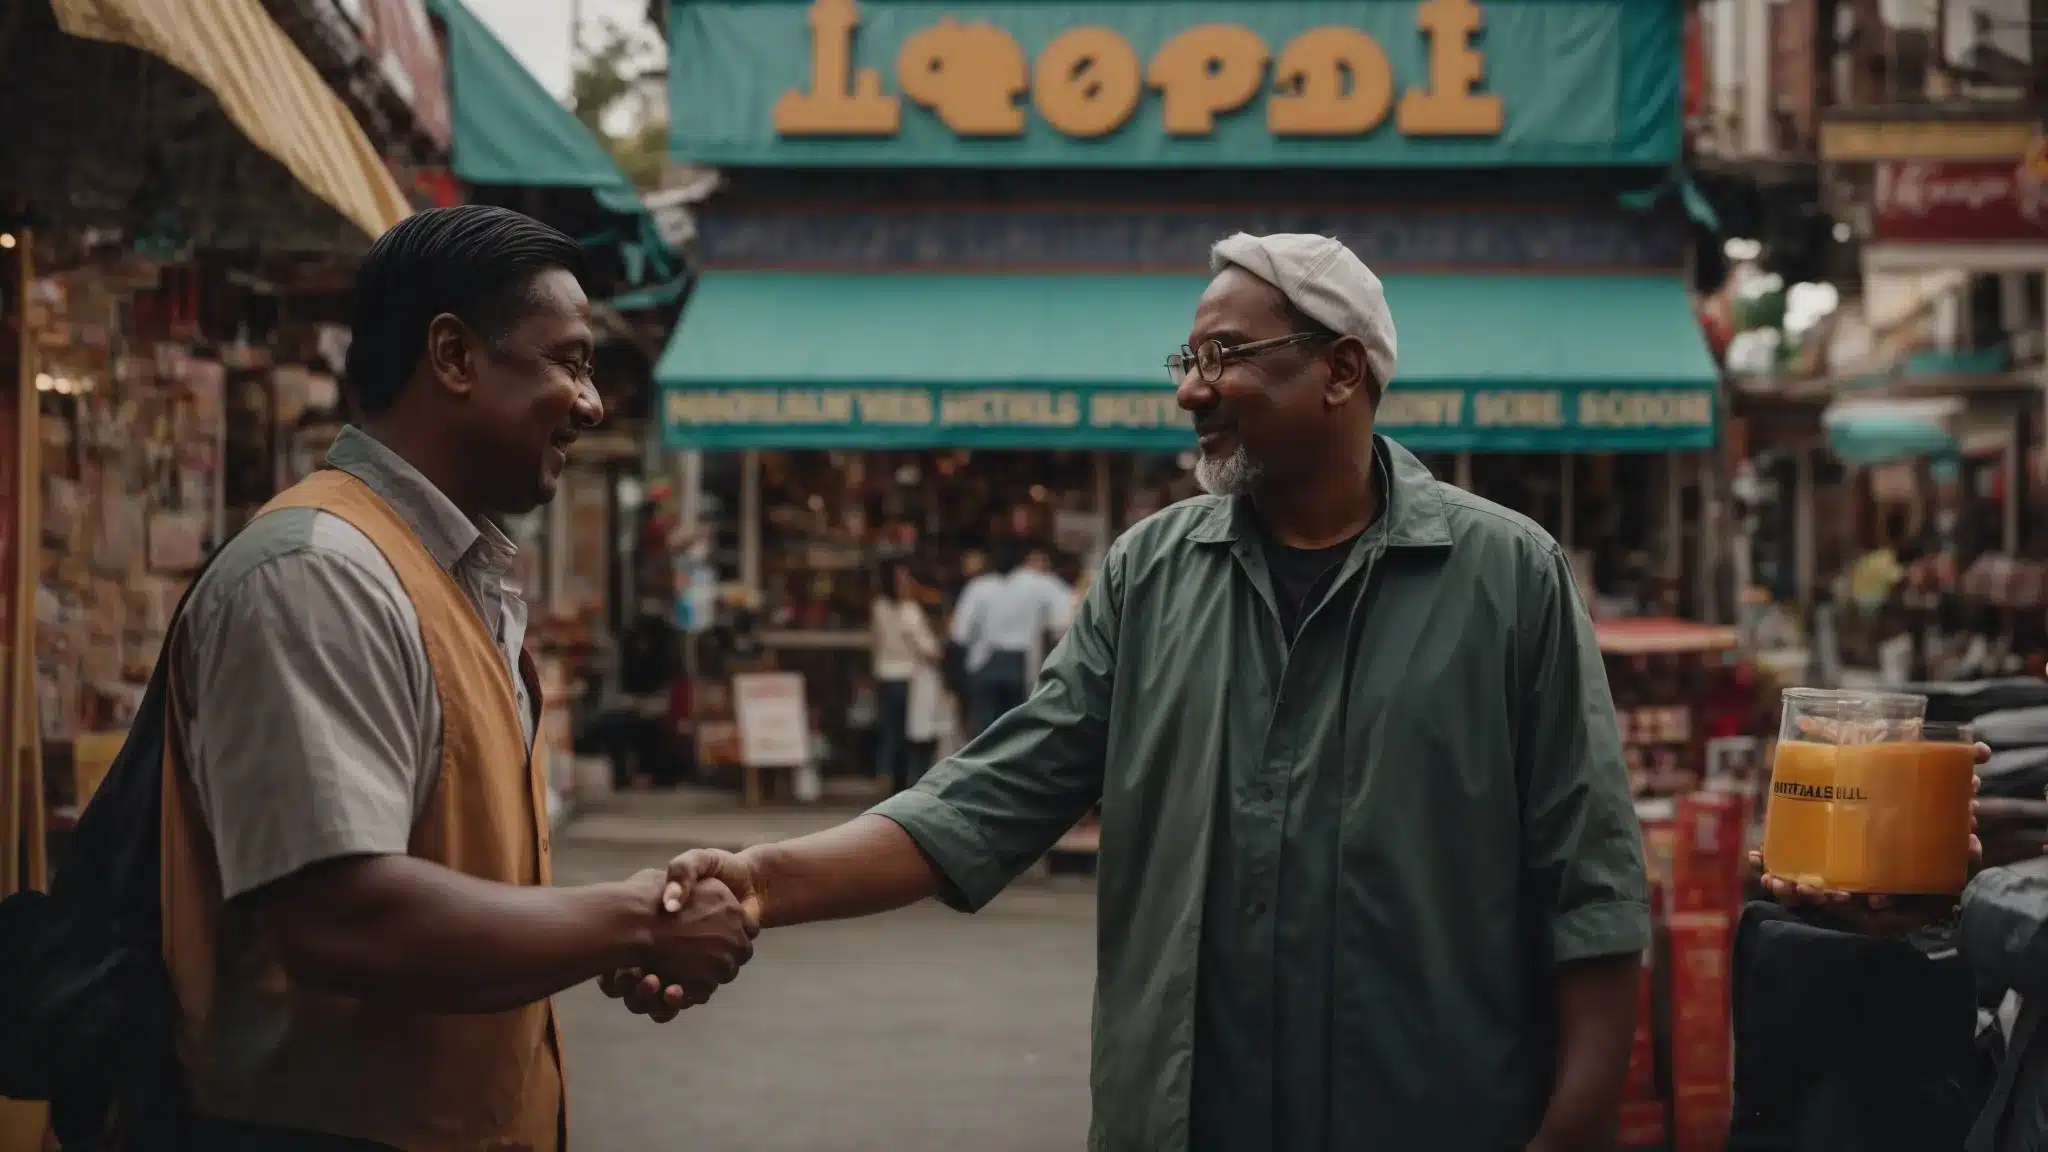 A Local Business Owner Shakes Hands With A Neighboring Shop Owner Against A Backdrop Of Vibrant Small Businesses Lining A Bustling Street.